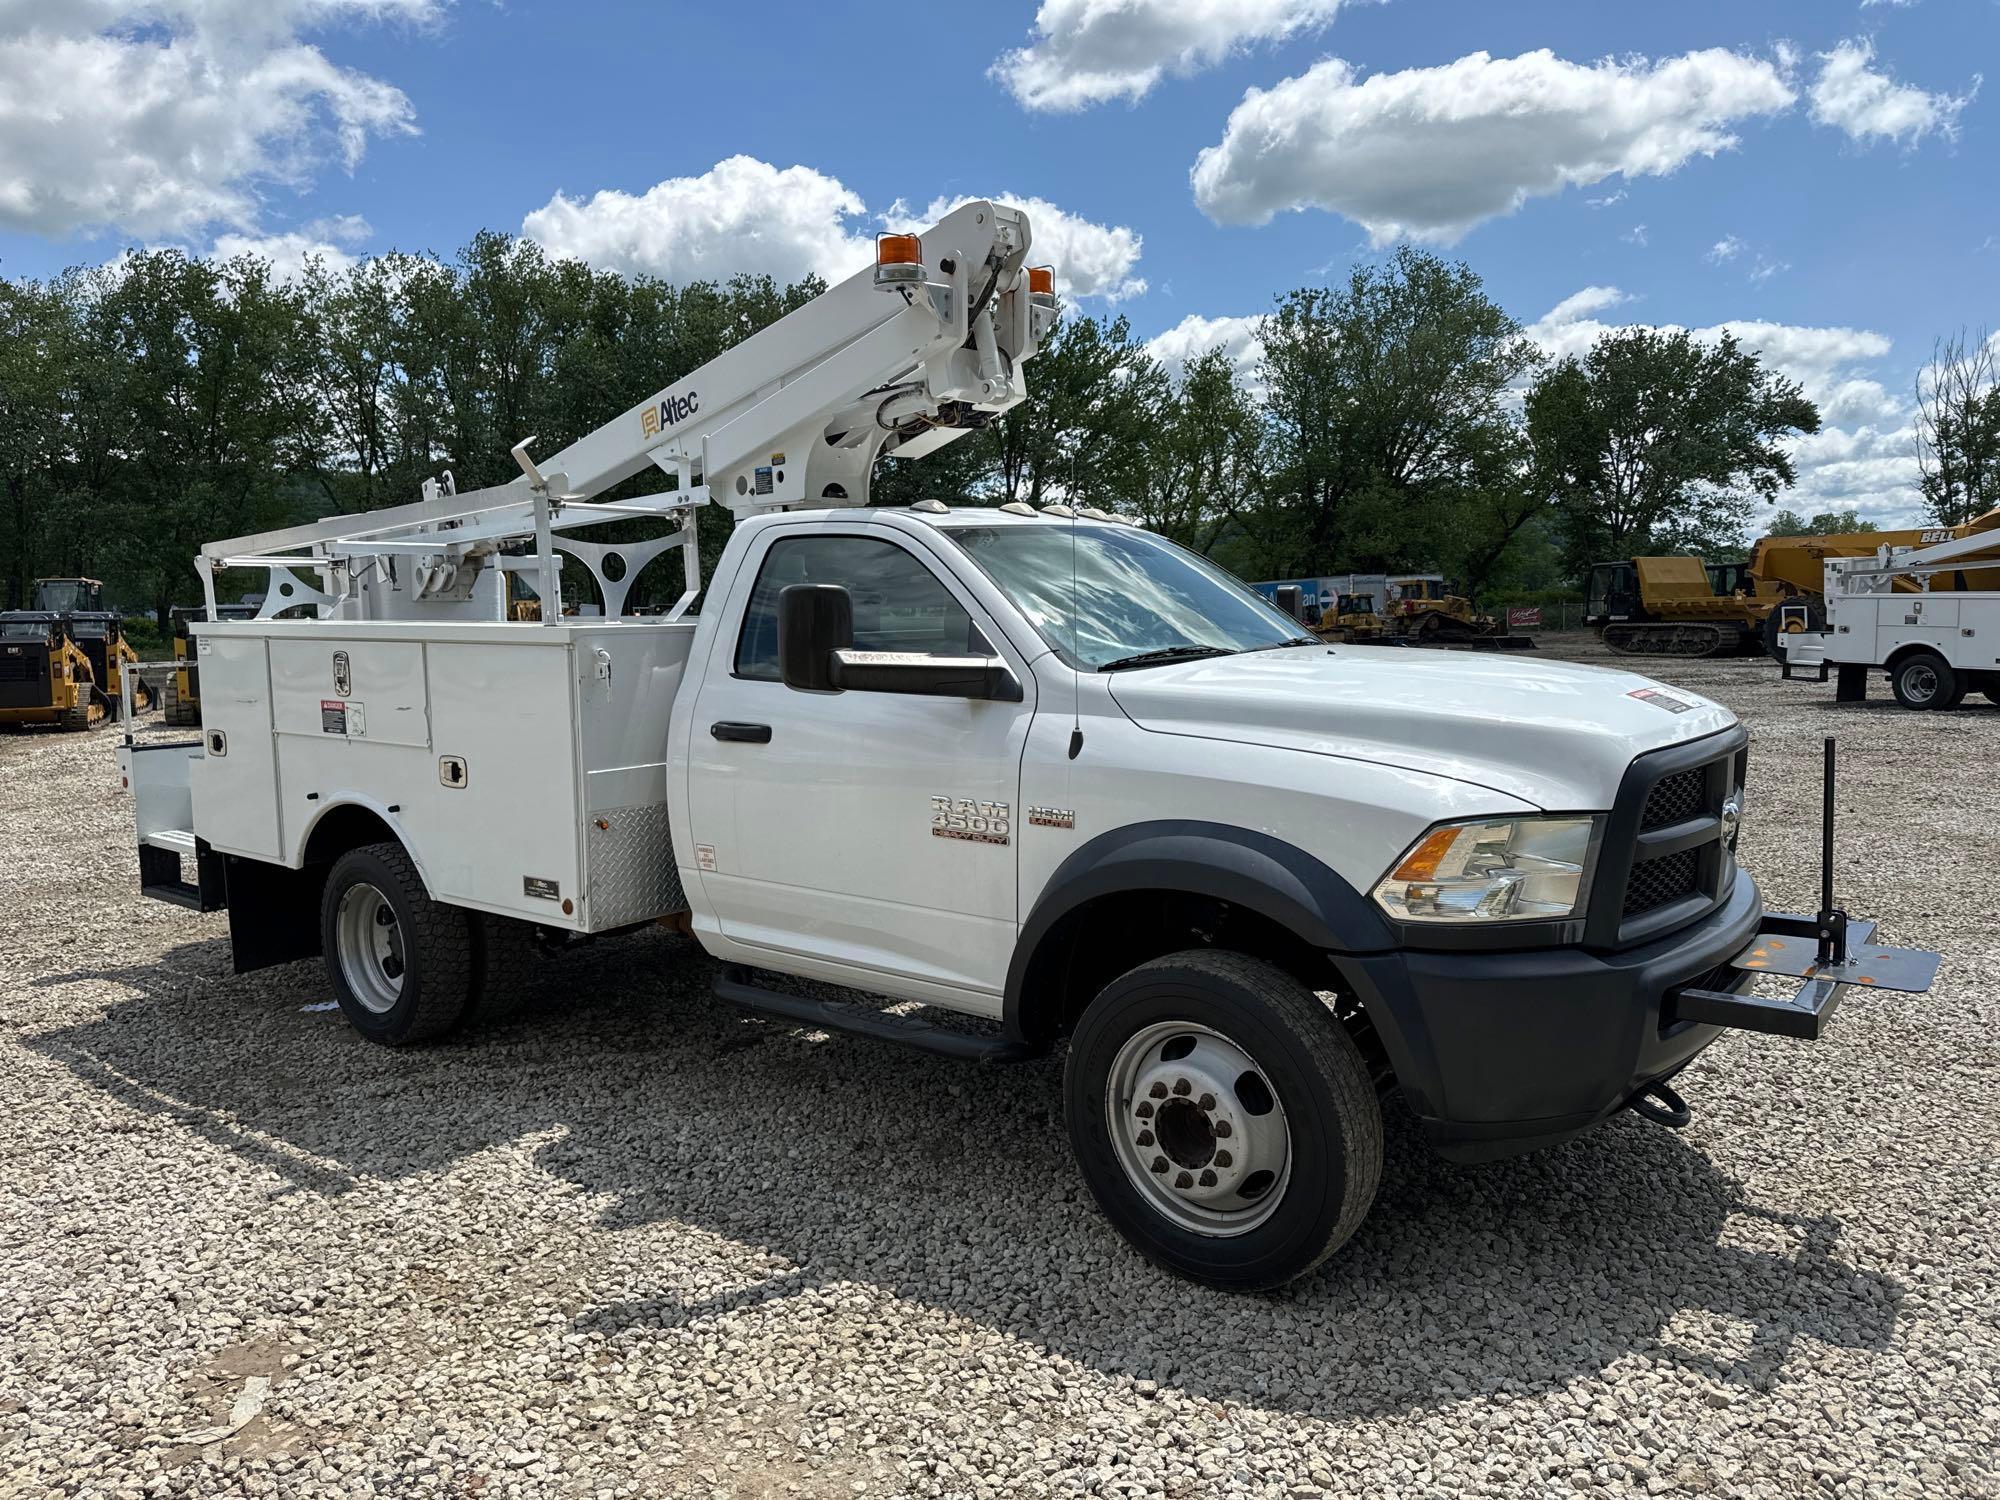 2016 DODGE 4500 BUCKET TRUCK VN:342975 powered by 6.4L Hemi gas engine, equipped with Allison